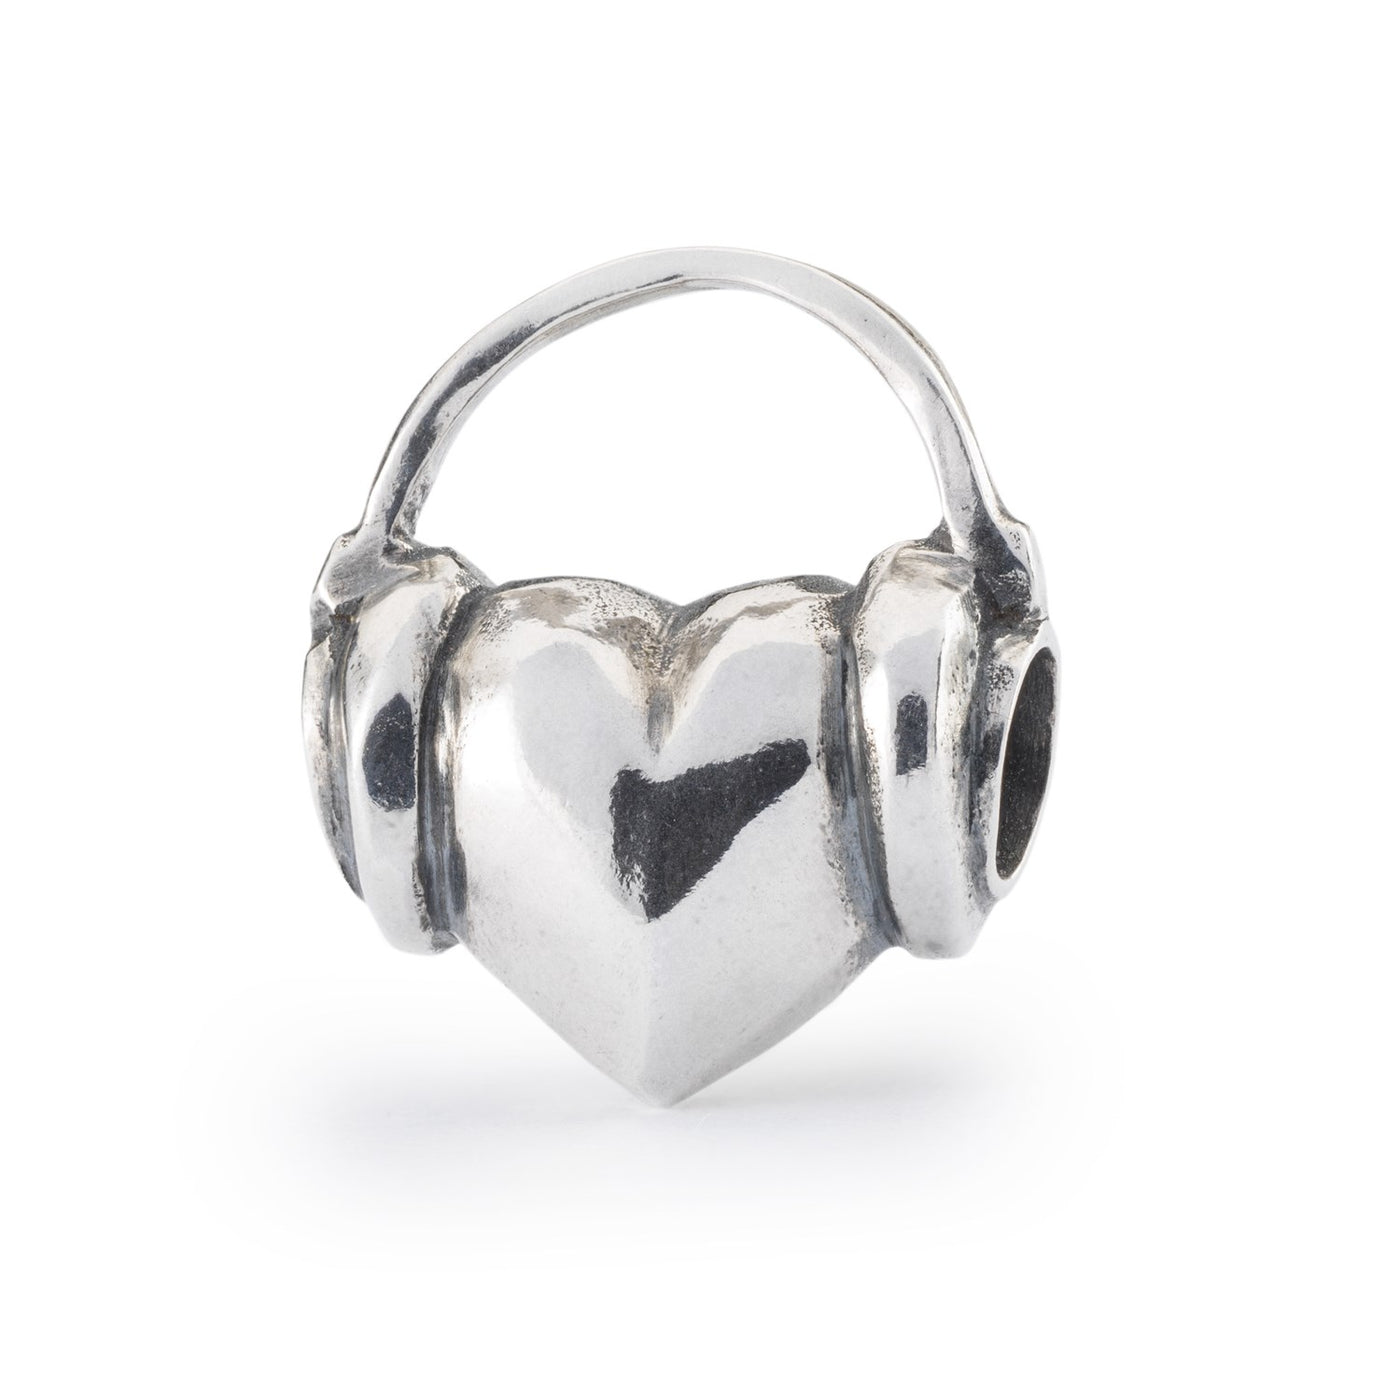 Our Melody is a sterling silver bead with a design of a heart with headphones on. 